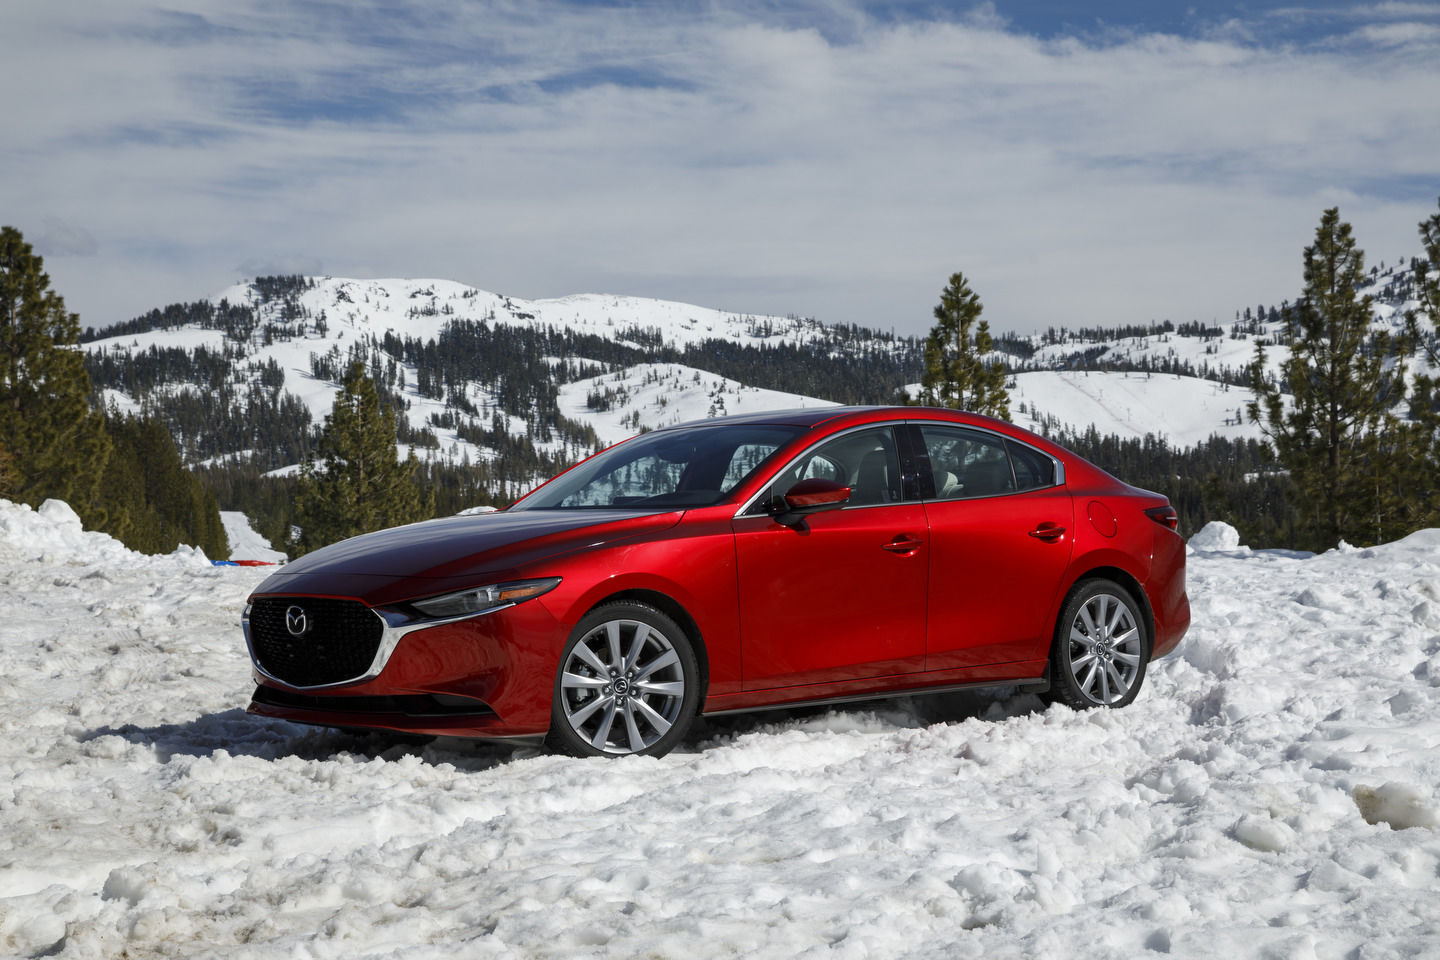 Three things to love about the 2022 Mazda3